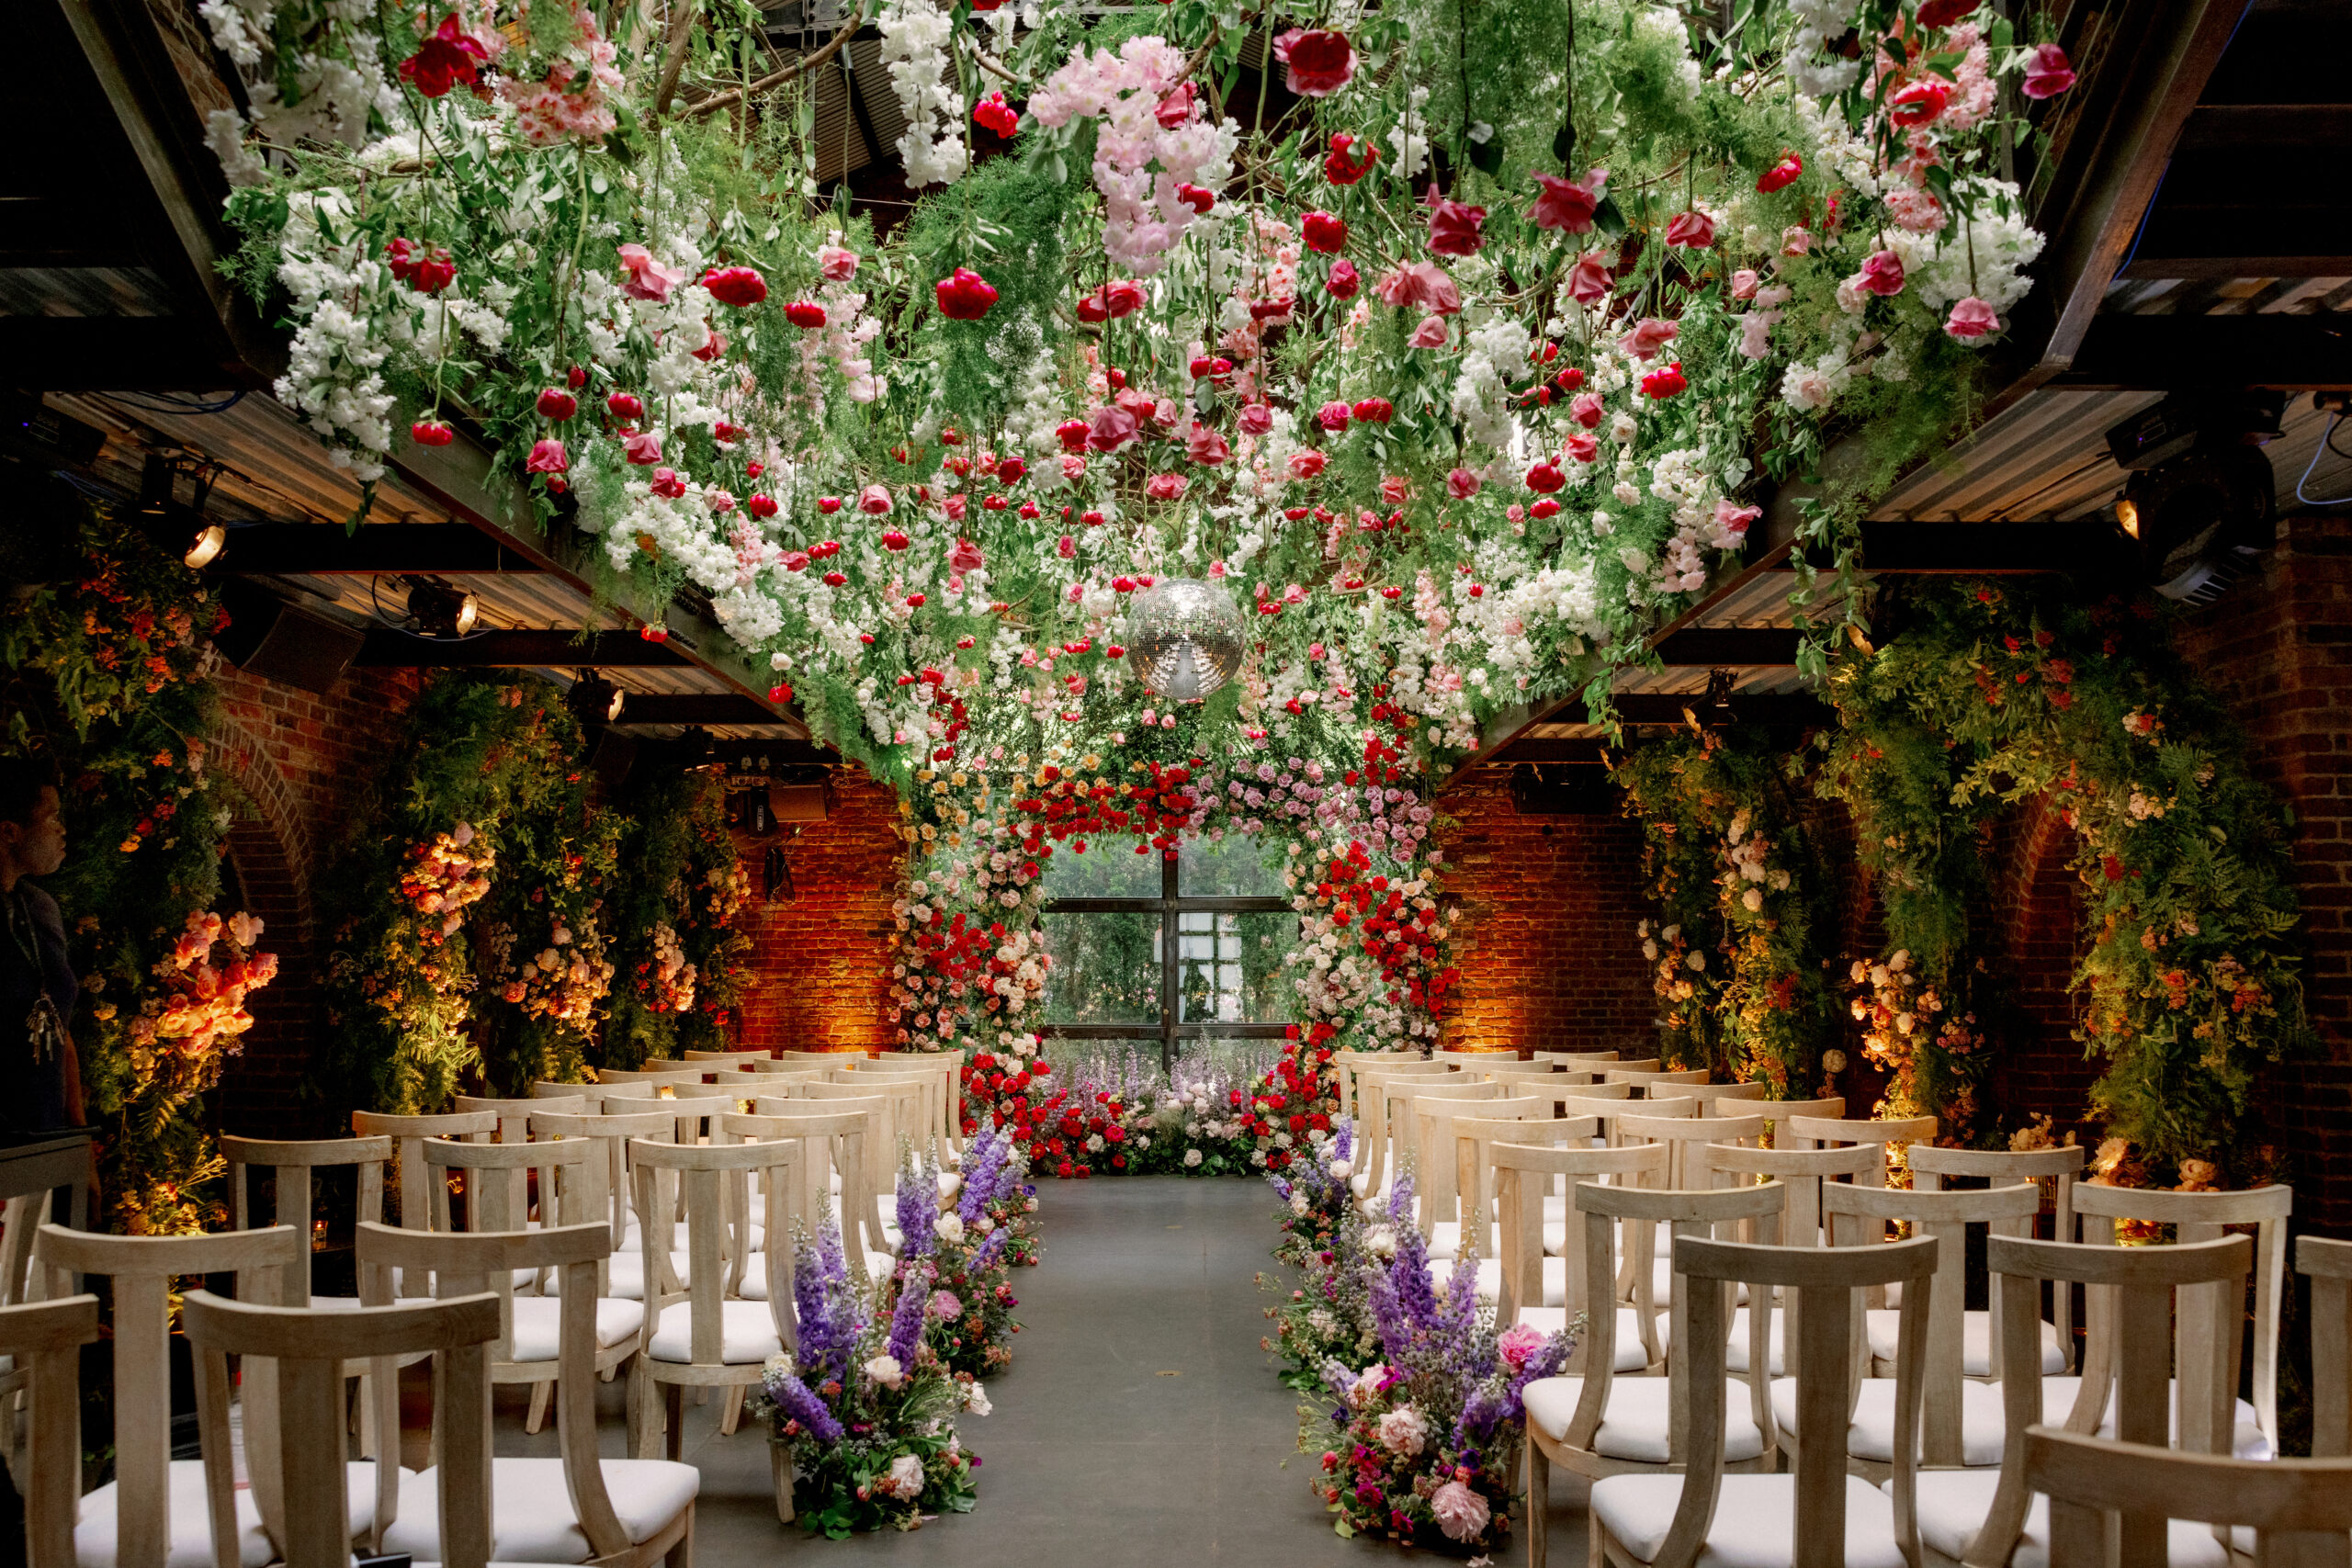 Beautiful ceremony backdrop filled with flowers. Wedding details image by Jenny Fu Studio